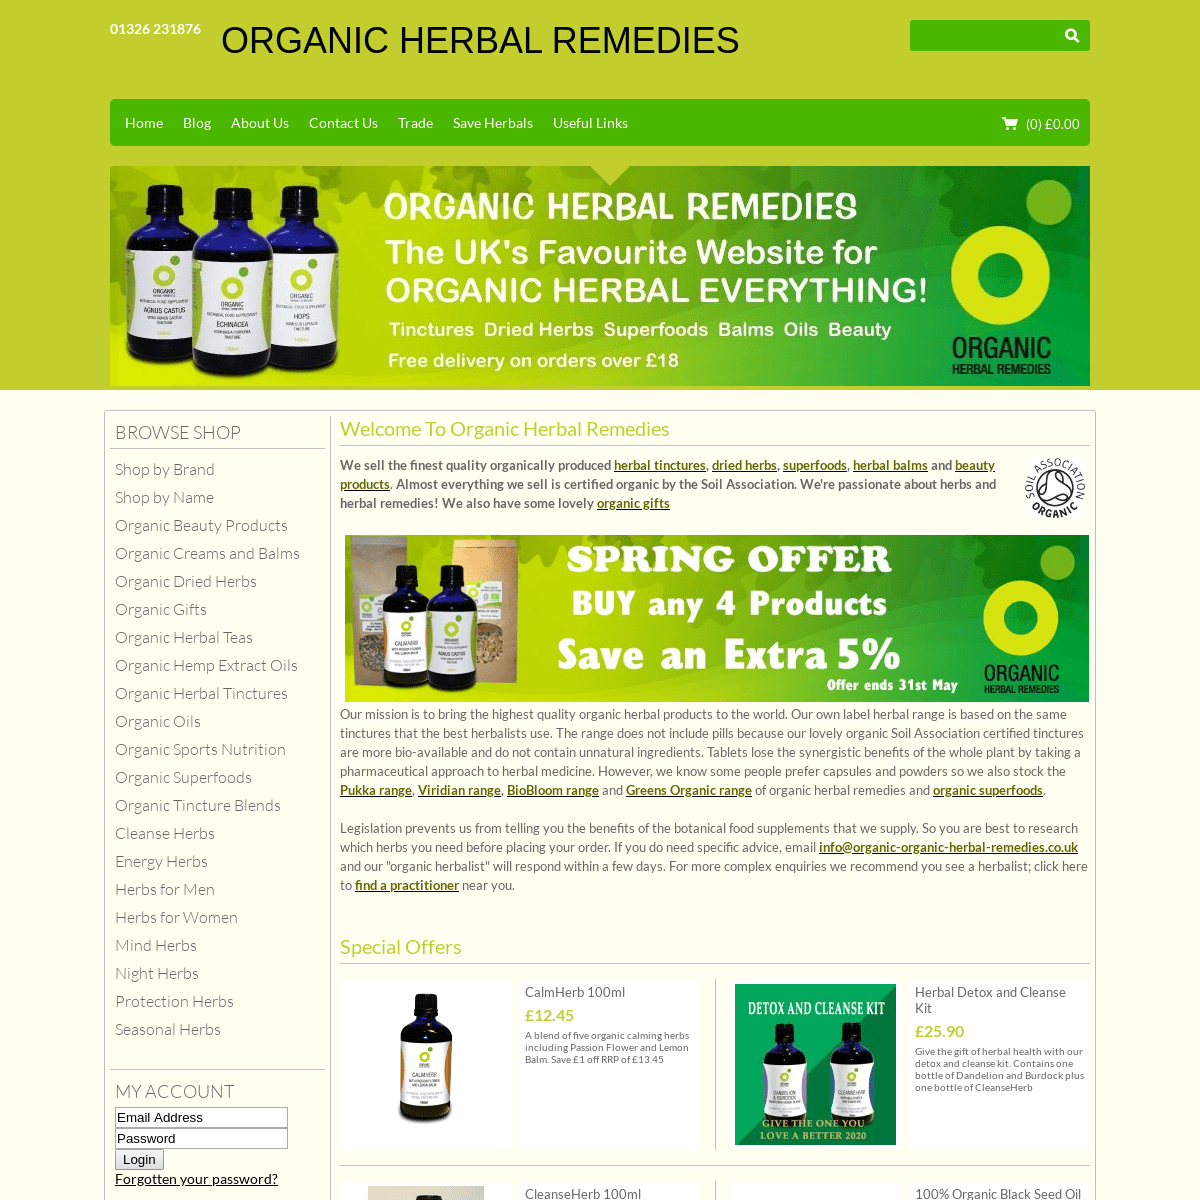 A complete backup of organic-herbal-remedies.co.uk